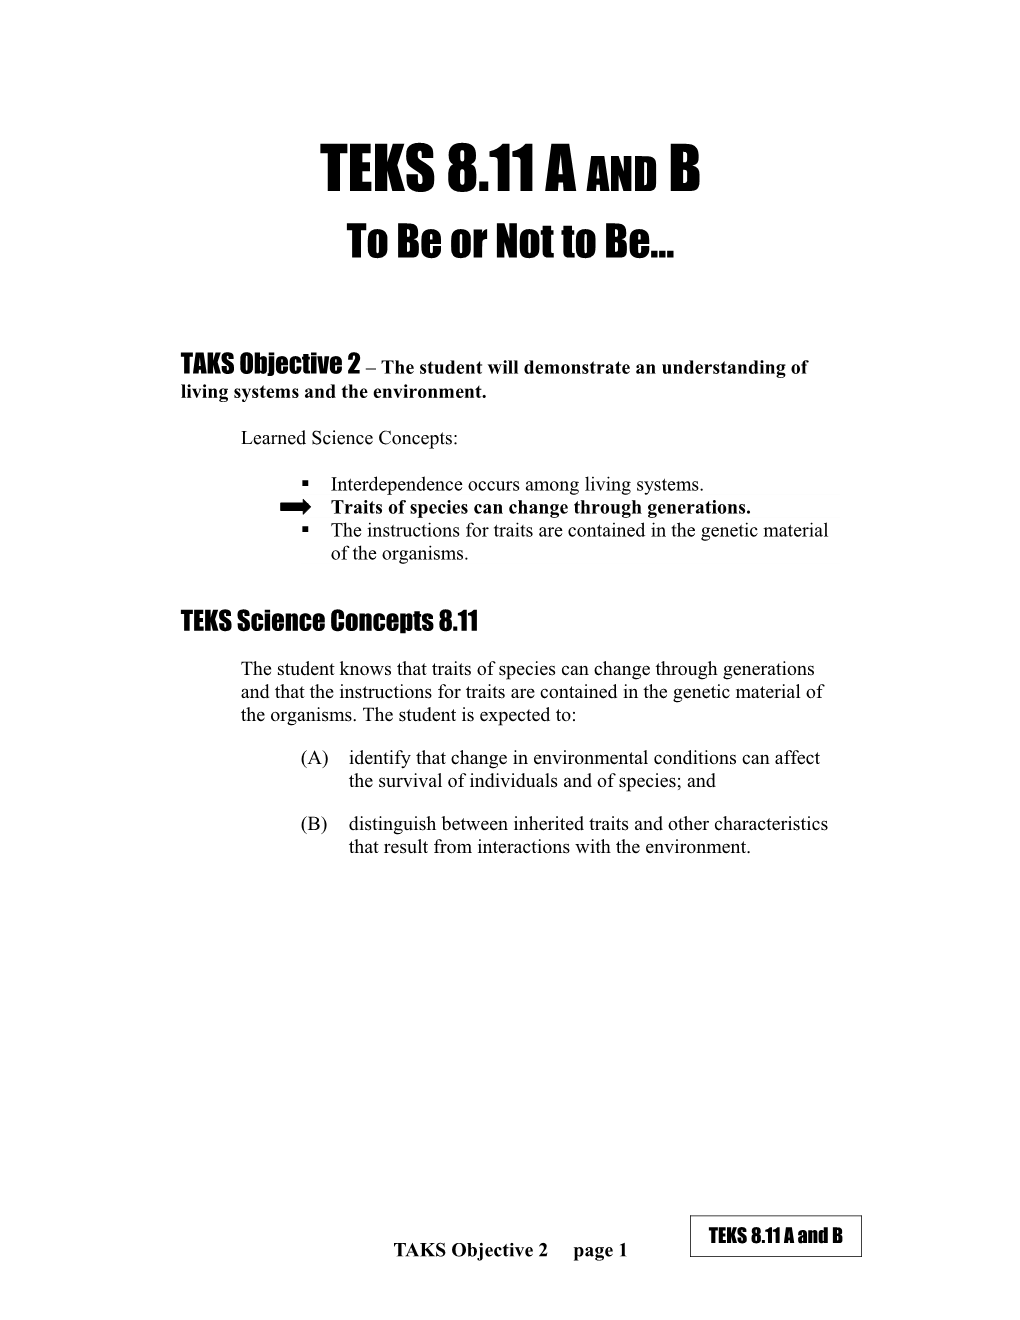 TAKS Objective 2 the Student Will Demonstrate an Understanding of Living Systems and The